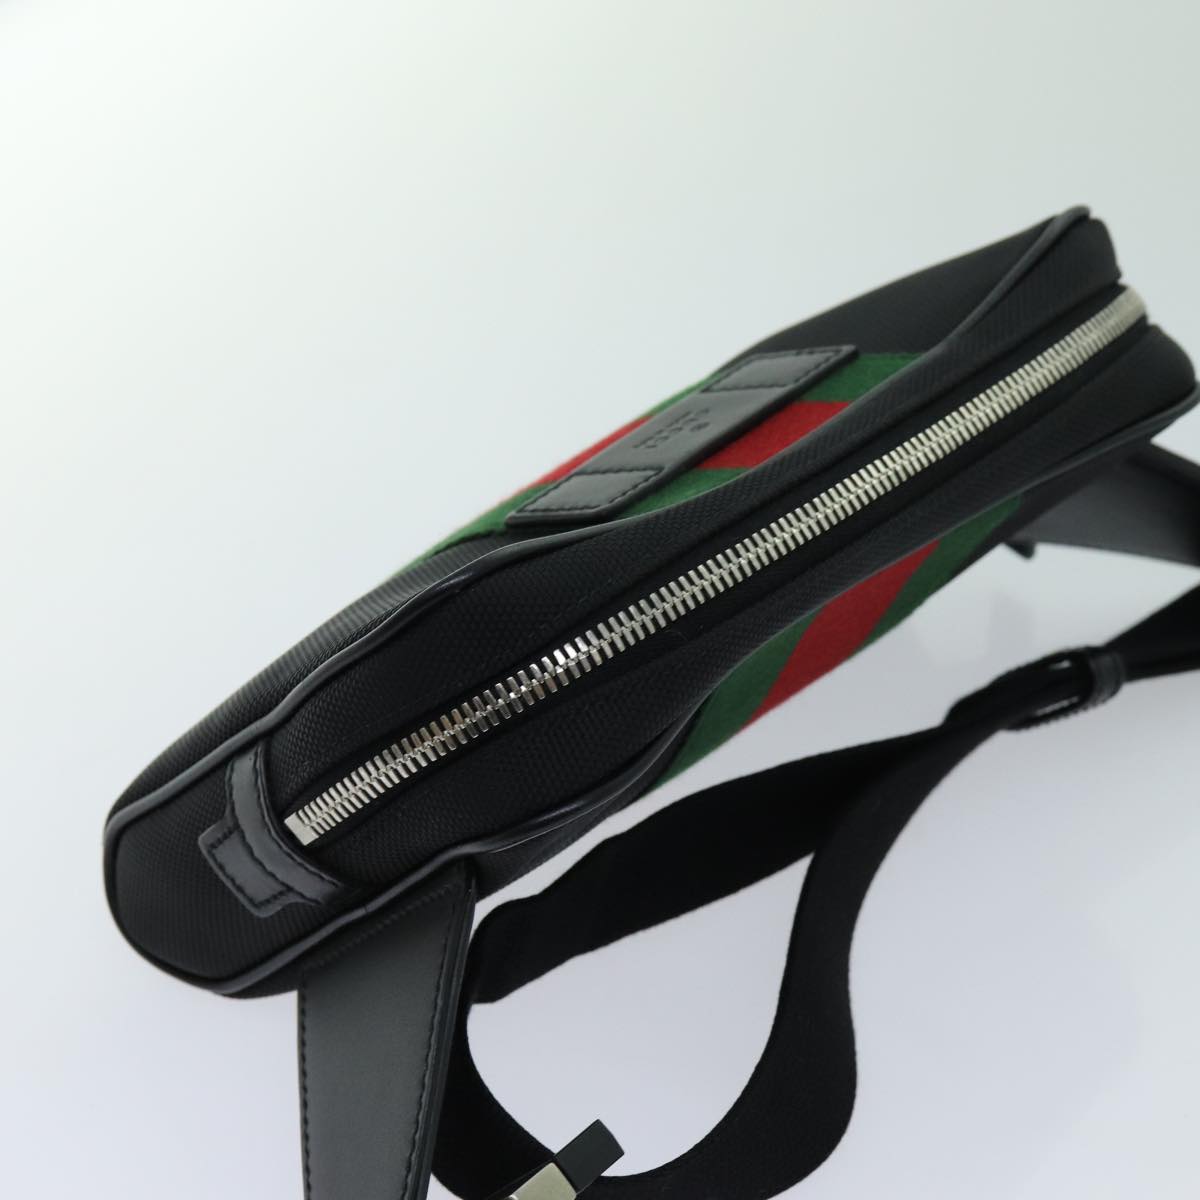 GUCCI Web Sherry Line Waist bag Canvas Outlet Black Red Green 630919 Auth 70293